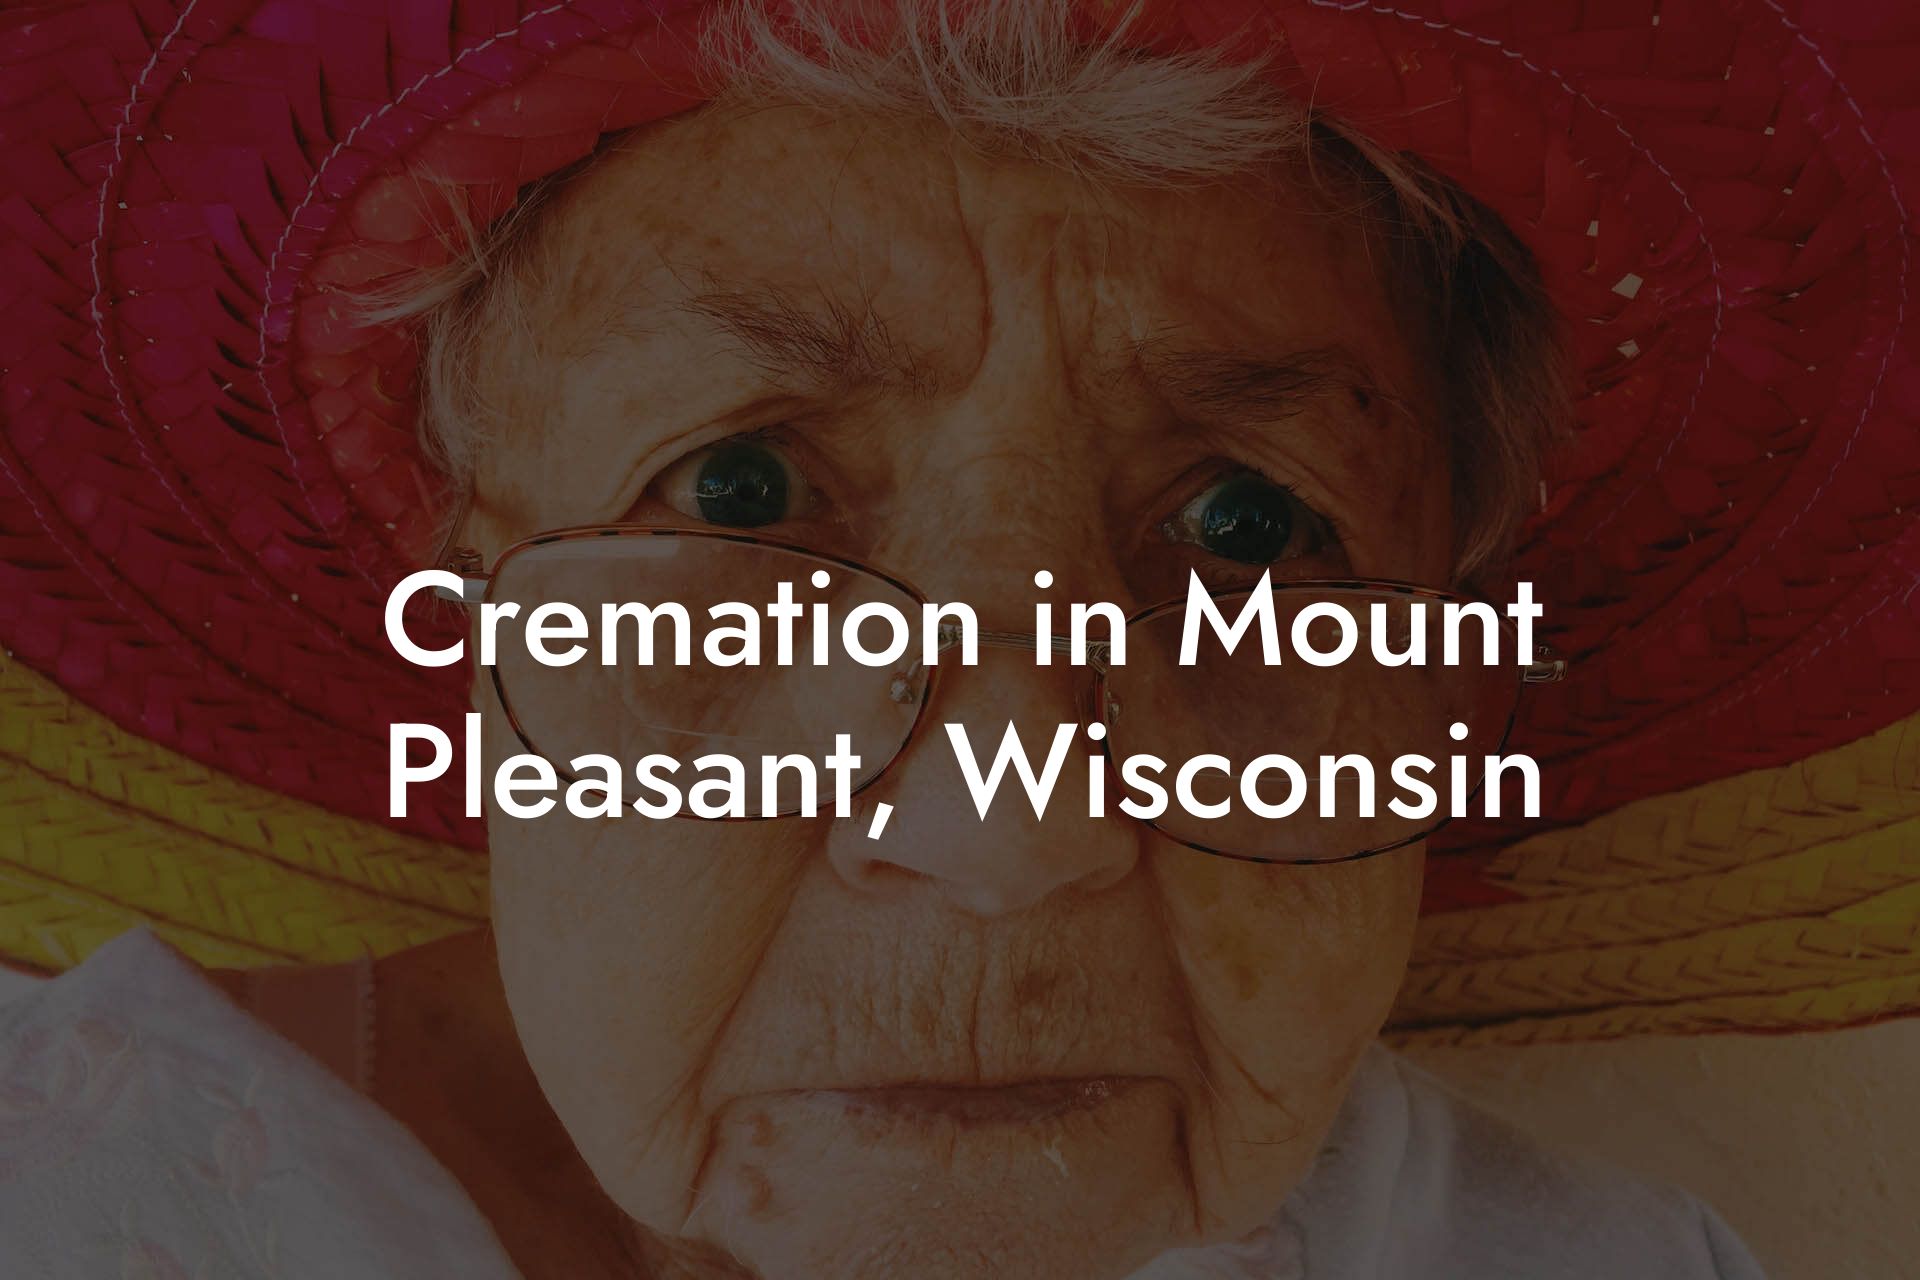 Cremation in Mount Pleasant, Wisconsin